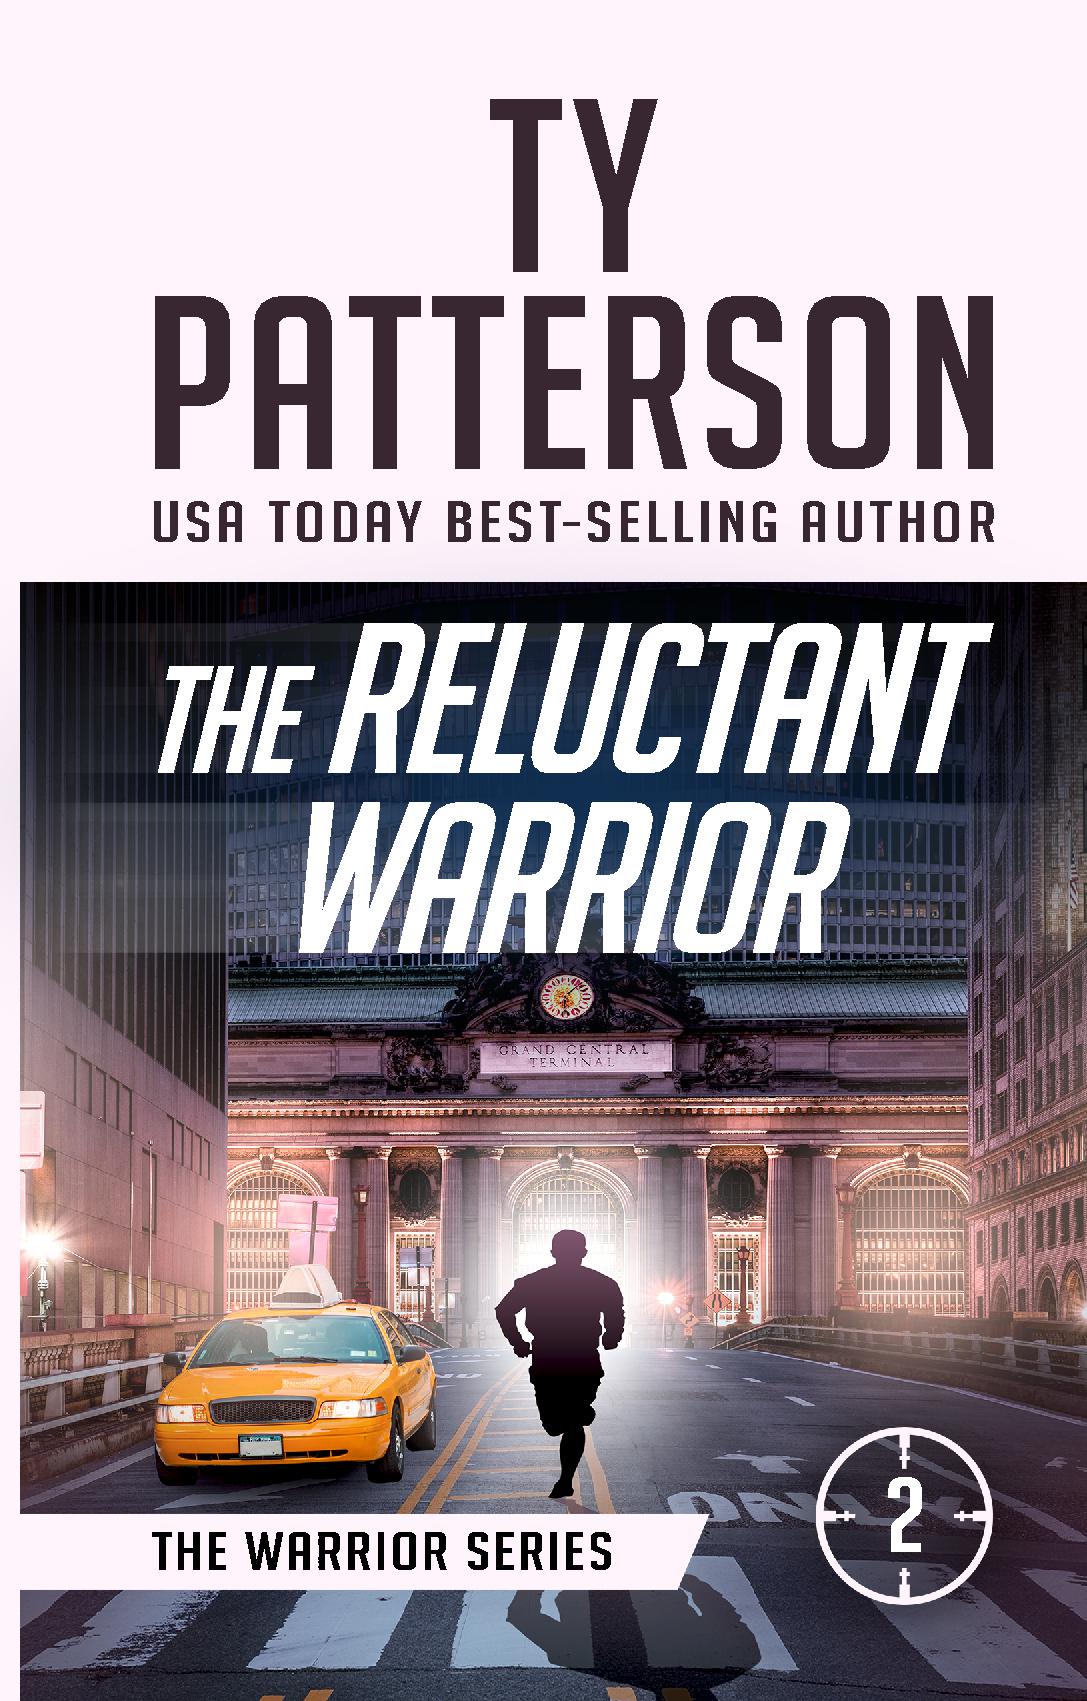 The Reluctant Warrior - Paperback